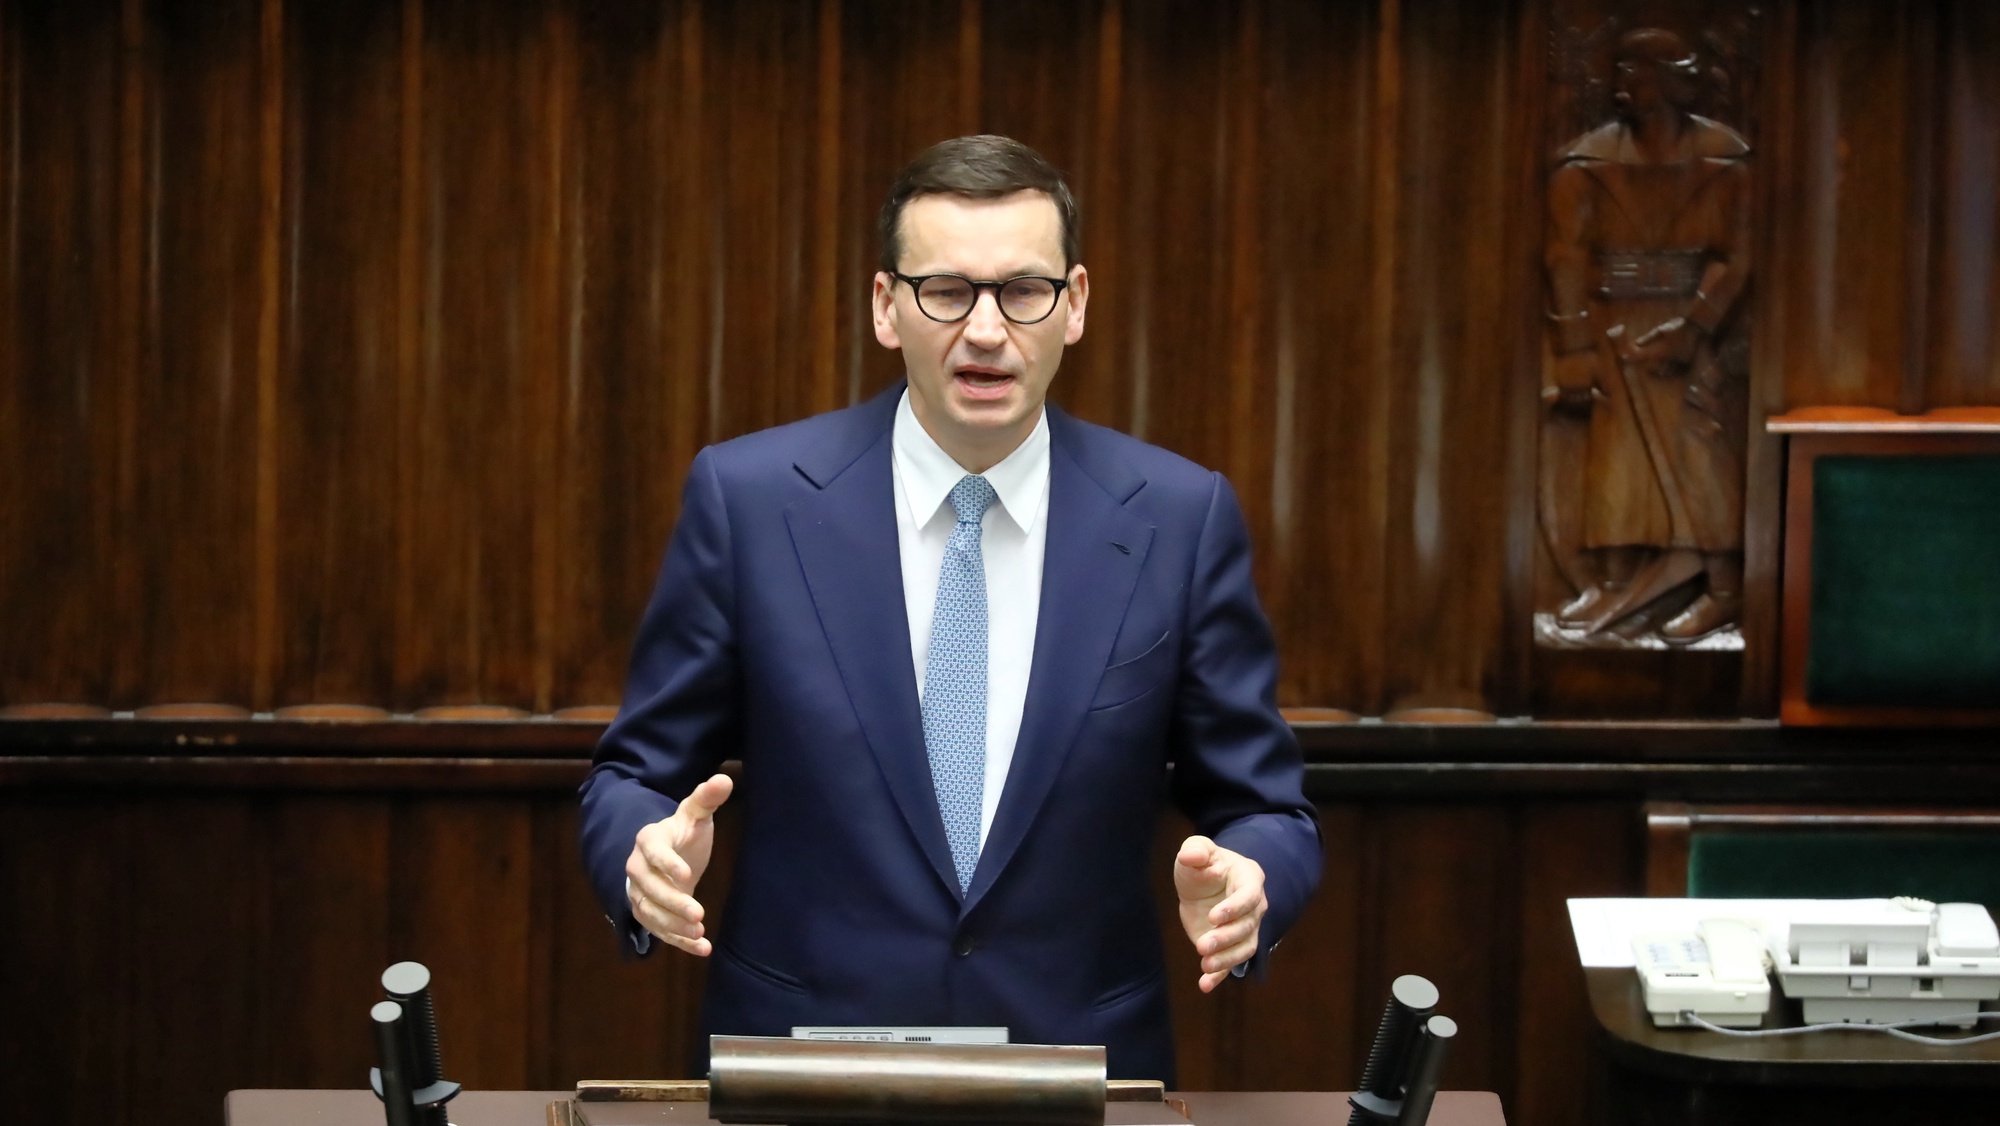 epa09646452 Polish Prime Minister Mateusz Morawiecki speaks during a parliamentary debate on the Polish budget 2022 in the Sejm (lower house) in Warsaw, Poland, 17 Deccember 2021.  EPA/Tomasz Gzell POLAND OUT